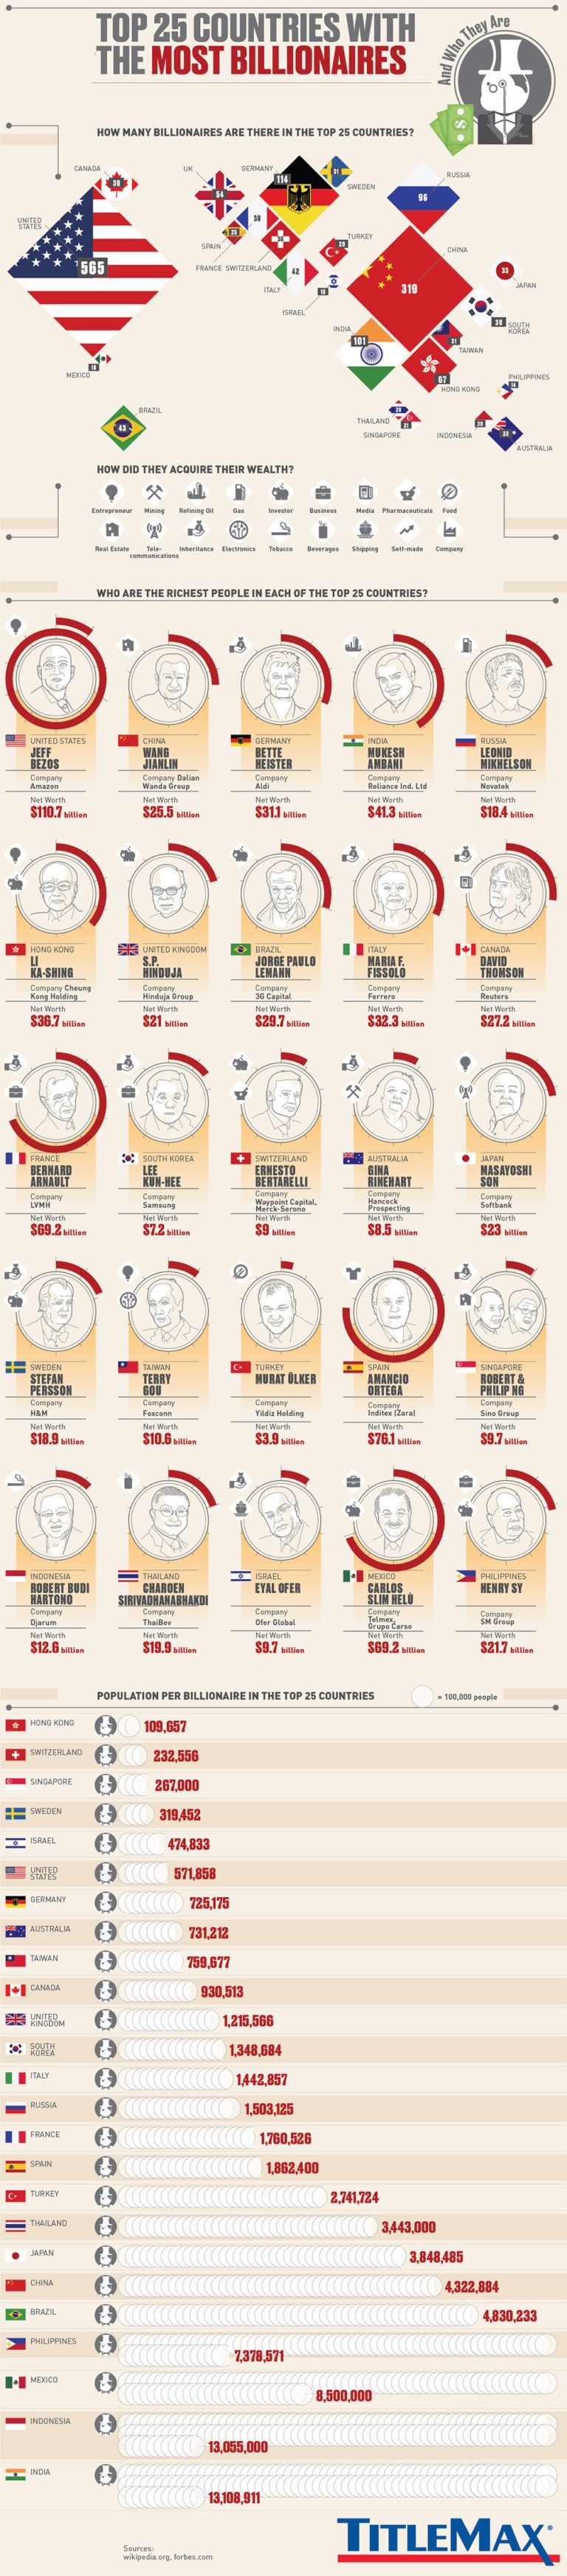 top 25 countries most billionaires